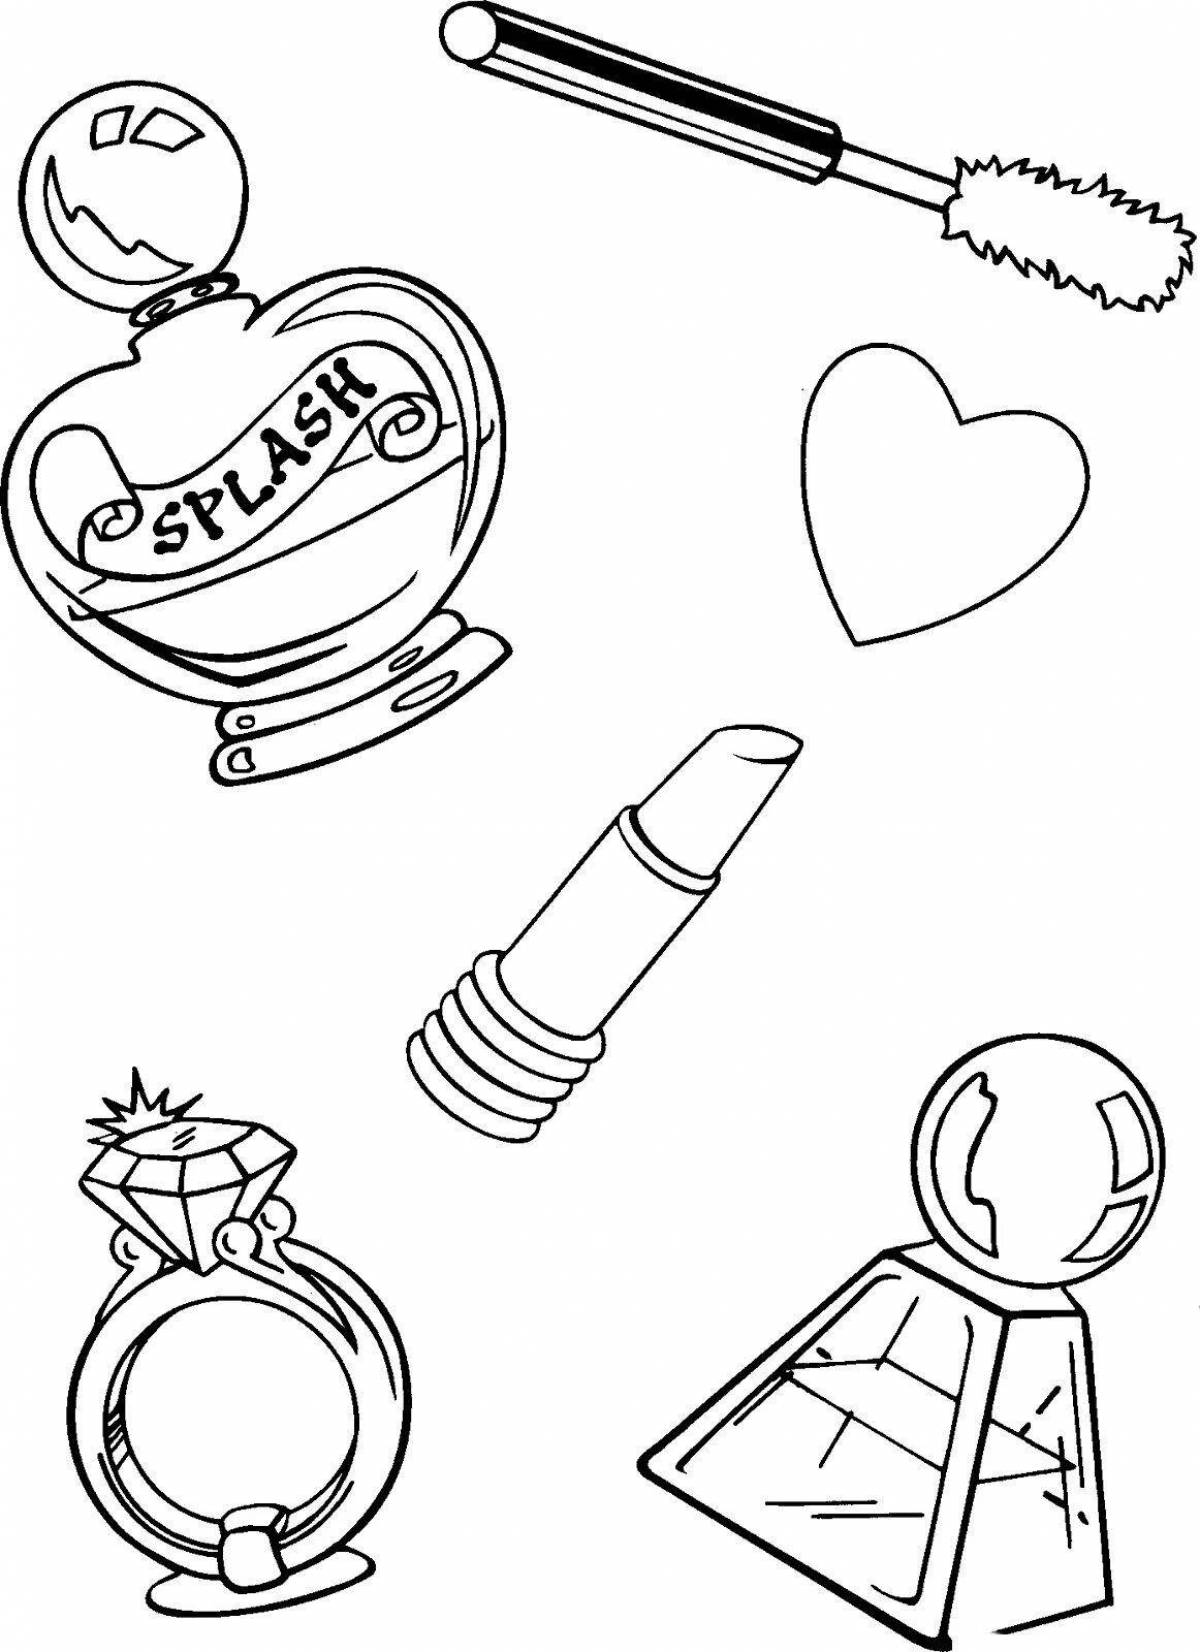 Coloring pages for babies